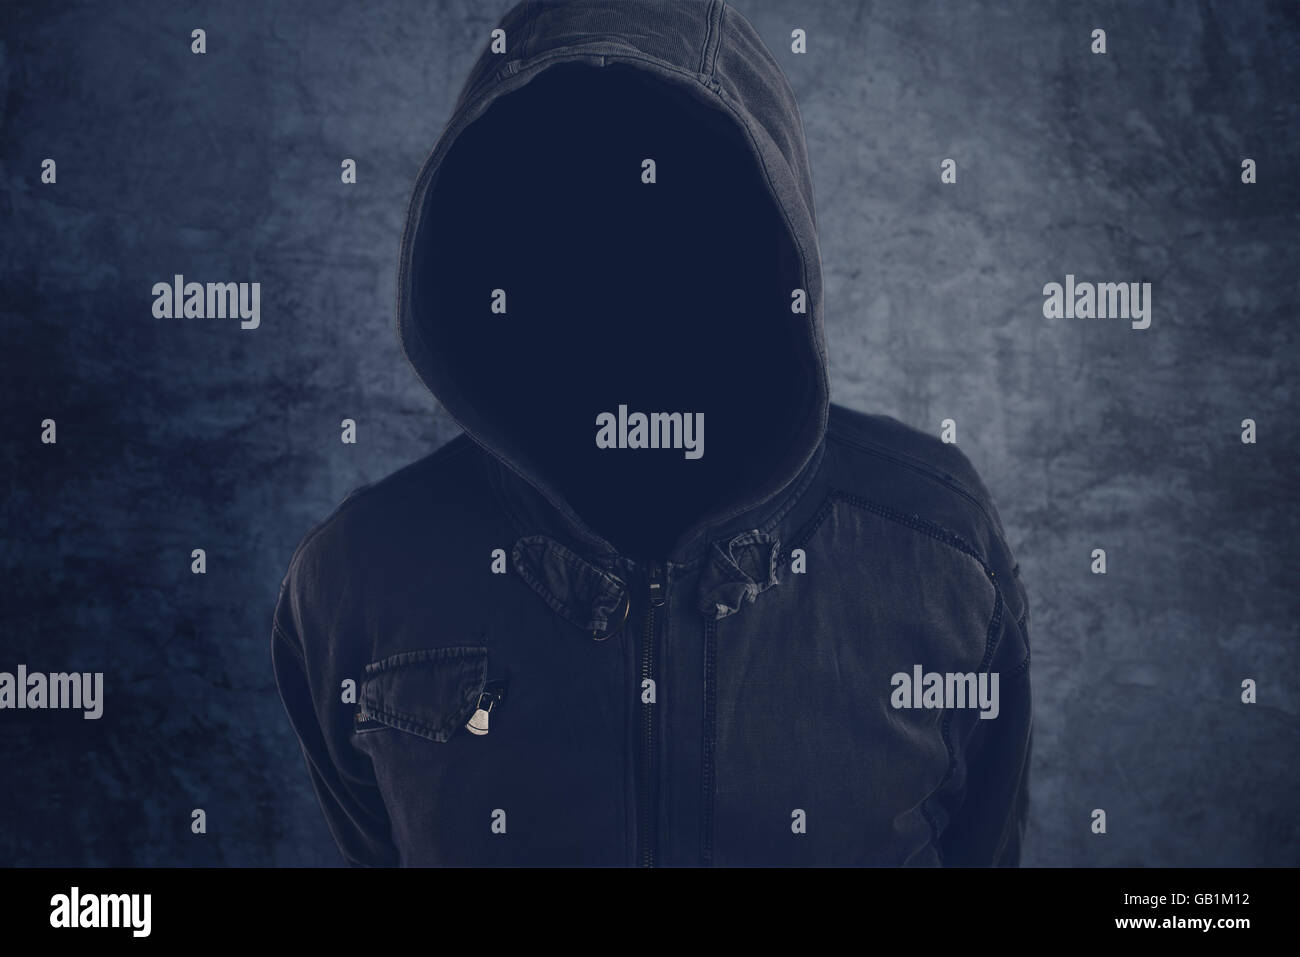 Unrecognizable hooded soccer hooligan portrait, spooky faceless criminal person in jacket with hood Stock Photo